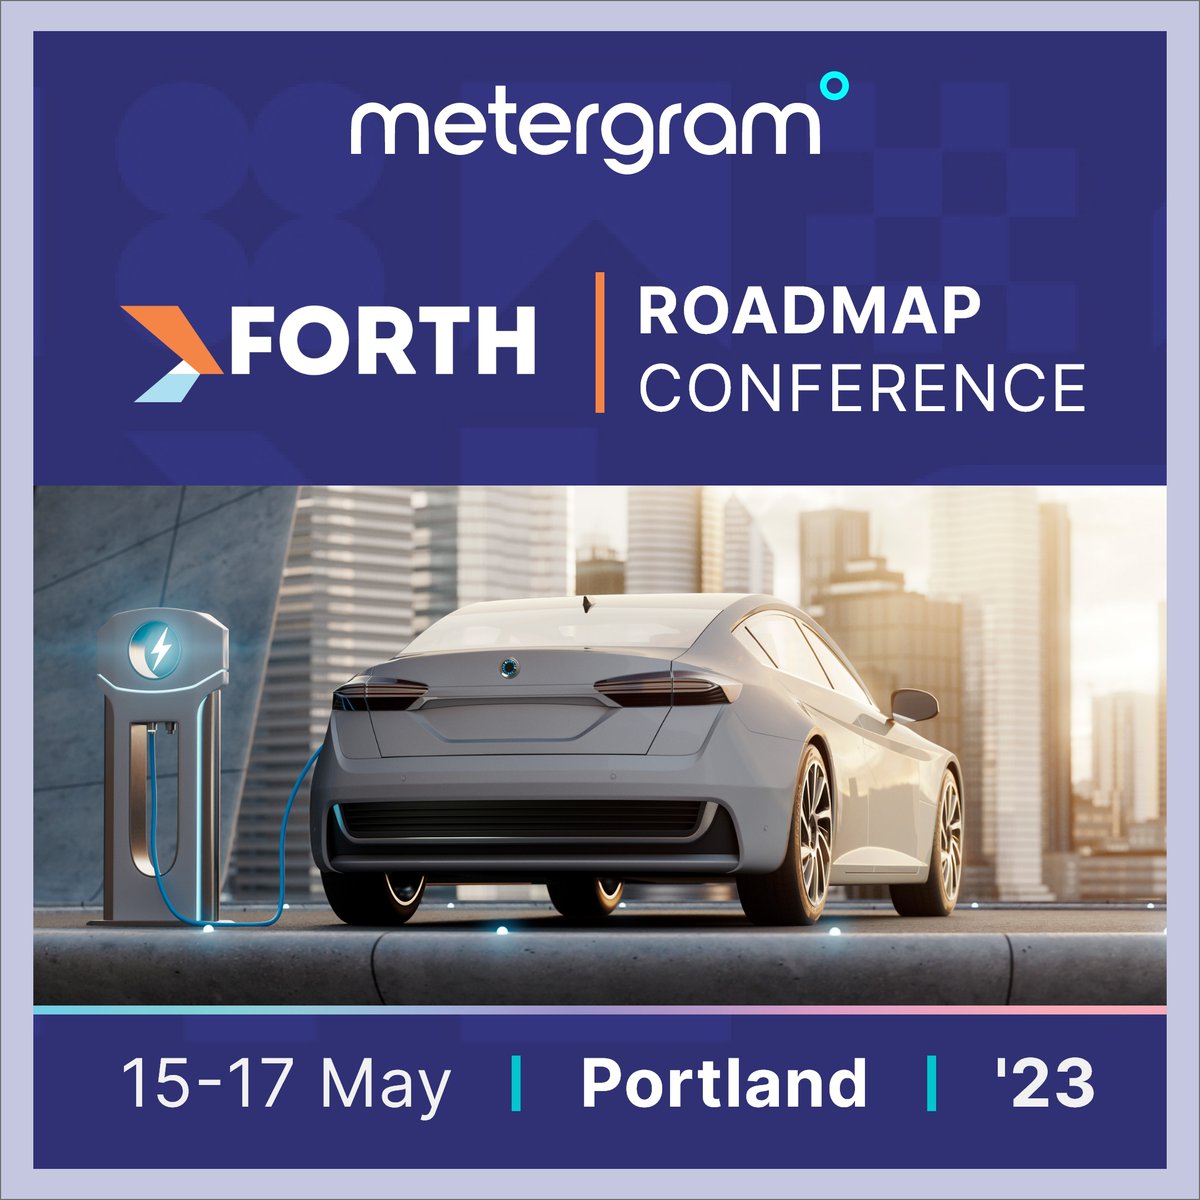 The journey continues - this time visiting Portland for the Forth Roadmap Conference! 🚘 We are looking forward to engaging and forging partnerships with key stakeholders and exploring the latest innovations in sustainable transportation.

See you there! ⚡
#RoadmapForth